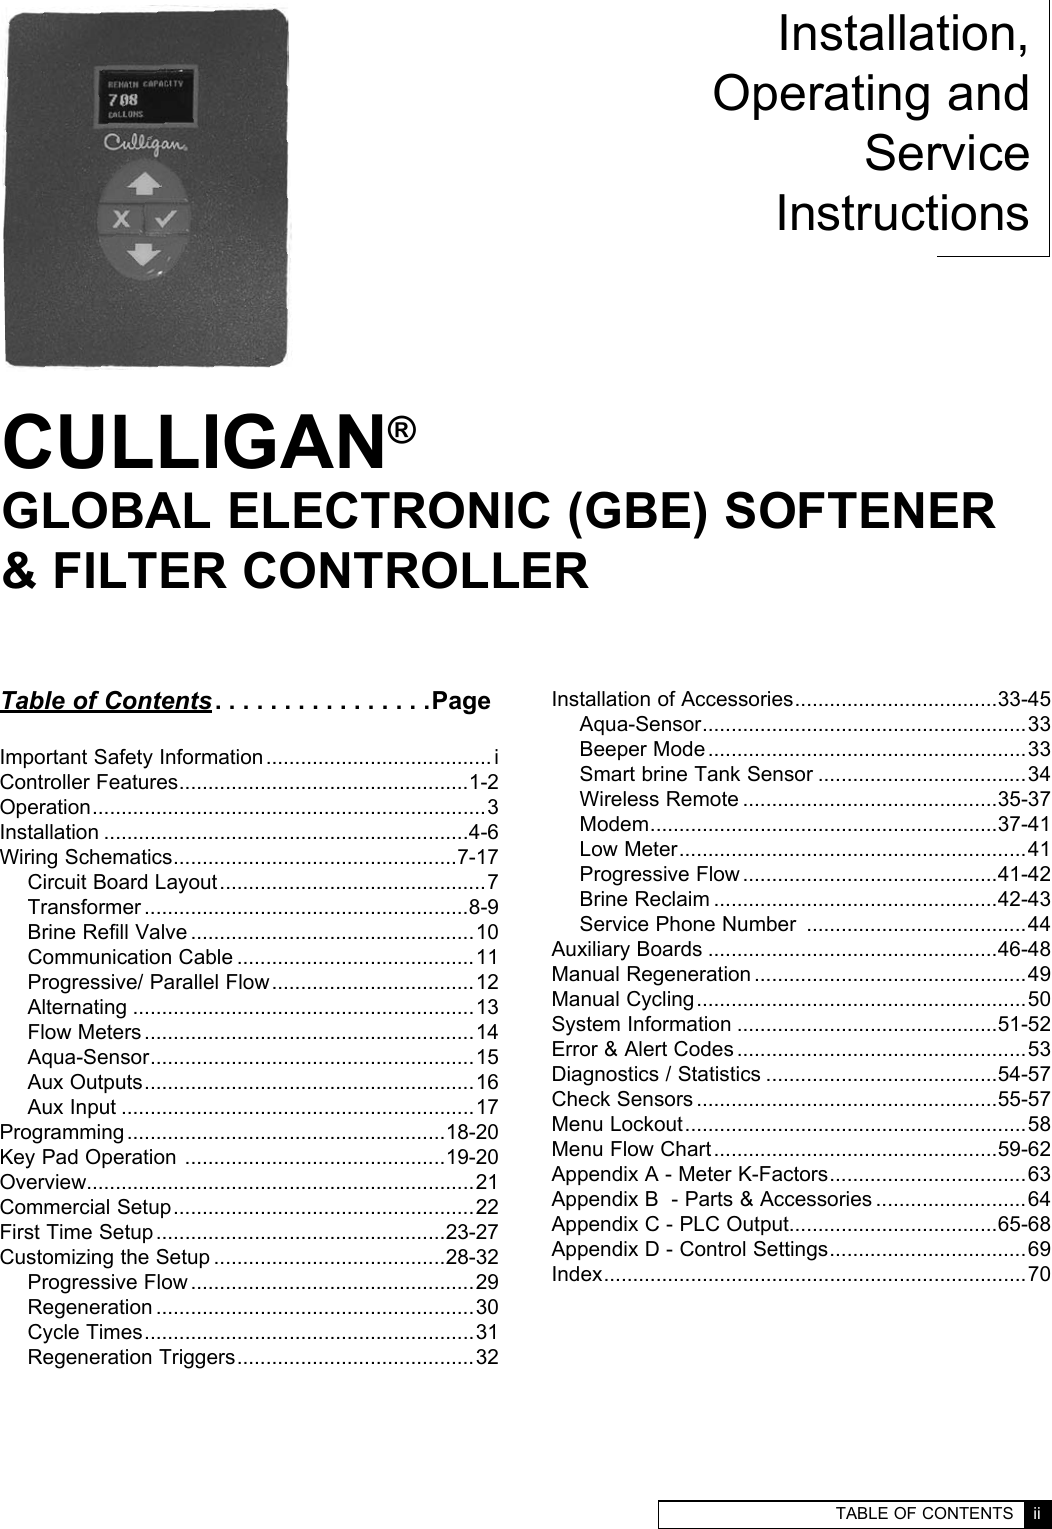   TABLE OF CONTENTS  ii  i  CULLIGAN GLOBAL ELECTRONIC CONTROLLERCULLIGAN®GLOBAL ELECTRONIC (GBE) SOFTENER  &amp; FILTER CONTROLLERInstallation,Operating andService InstructionsTable of Contents ................PageImportant Safety Information ....................................... iController Features ..................................................1-2Operation ....................................................................3Installation ...............................................................4-6Wiring Schematics .................................................7-17Circuit Board Layout ..............................................7Transformer ........................................................8-9Brine Refill Valve .................................................10Communication Cable .........................................11Progressive/ Parallel Flow ...................................12Alternating ...........................................................13Flow Meters .........................................................14Aqua-Sensor ........................................................15Aux Outputs .........................................................16Aux Input .............................................................17Programming .......................................................18-20Key Pad Operation  .............................................19-20Overview...................................................................21Commercial Setup ....................................................22First Time Setup ..................................................23-27Customizing the Setup ........................................28-32Progressive Flow .................................................29Regeneration .......................................................30Cycle Times .........................................................31Regeneration Triggers .........................................32Installation of Accessories ...................................33-45Aqua-Sensor ........................................................33Beeper Mode .......................................................33Smart brine Tank Sensor ....................................34Wireless Remote ............................................35-37Modem ............................................................37-41Low Meter ............................................................41Progressive Flow ............................................41-42Brine Reclaim .................................................42-43Service Phone Number  ......................................44Auxiliary Boards ..................................................46-48Manual Regeneration ...............................................49Manual Cycling .........................................................50System Information .............................................51-52Error &amp; Alert Codes ..................................................53Diagnostics / Statistics ........................................54-57Check Sensors ....................................................55-57Menu Lockout ...........................................................58Menu Flow Chart .................................................59-62Appendix A - Meter K-Factors ..................................63Appendix B  - Parts &amp; Accessories ..........................64Appendix C - PLC Output....................................65-68Appendix D - Control Settings ..................................69Index .........................................................................70